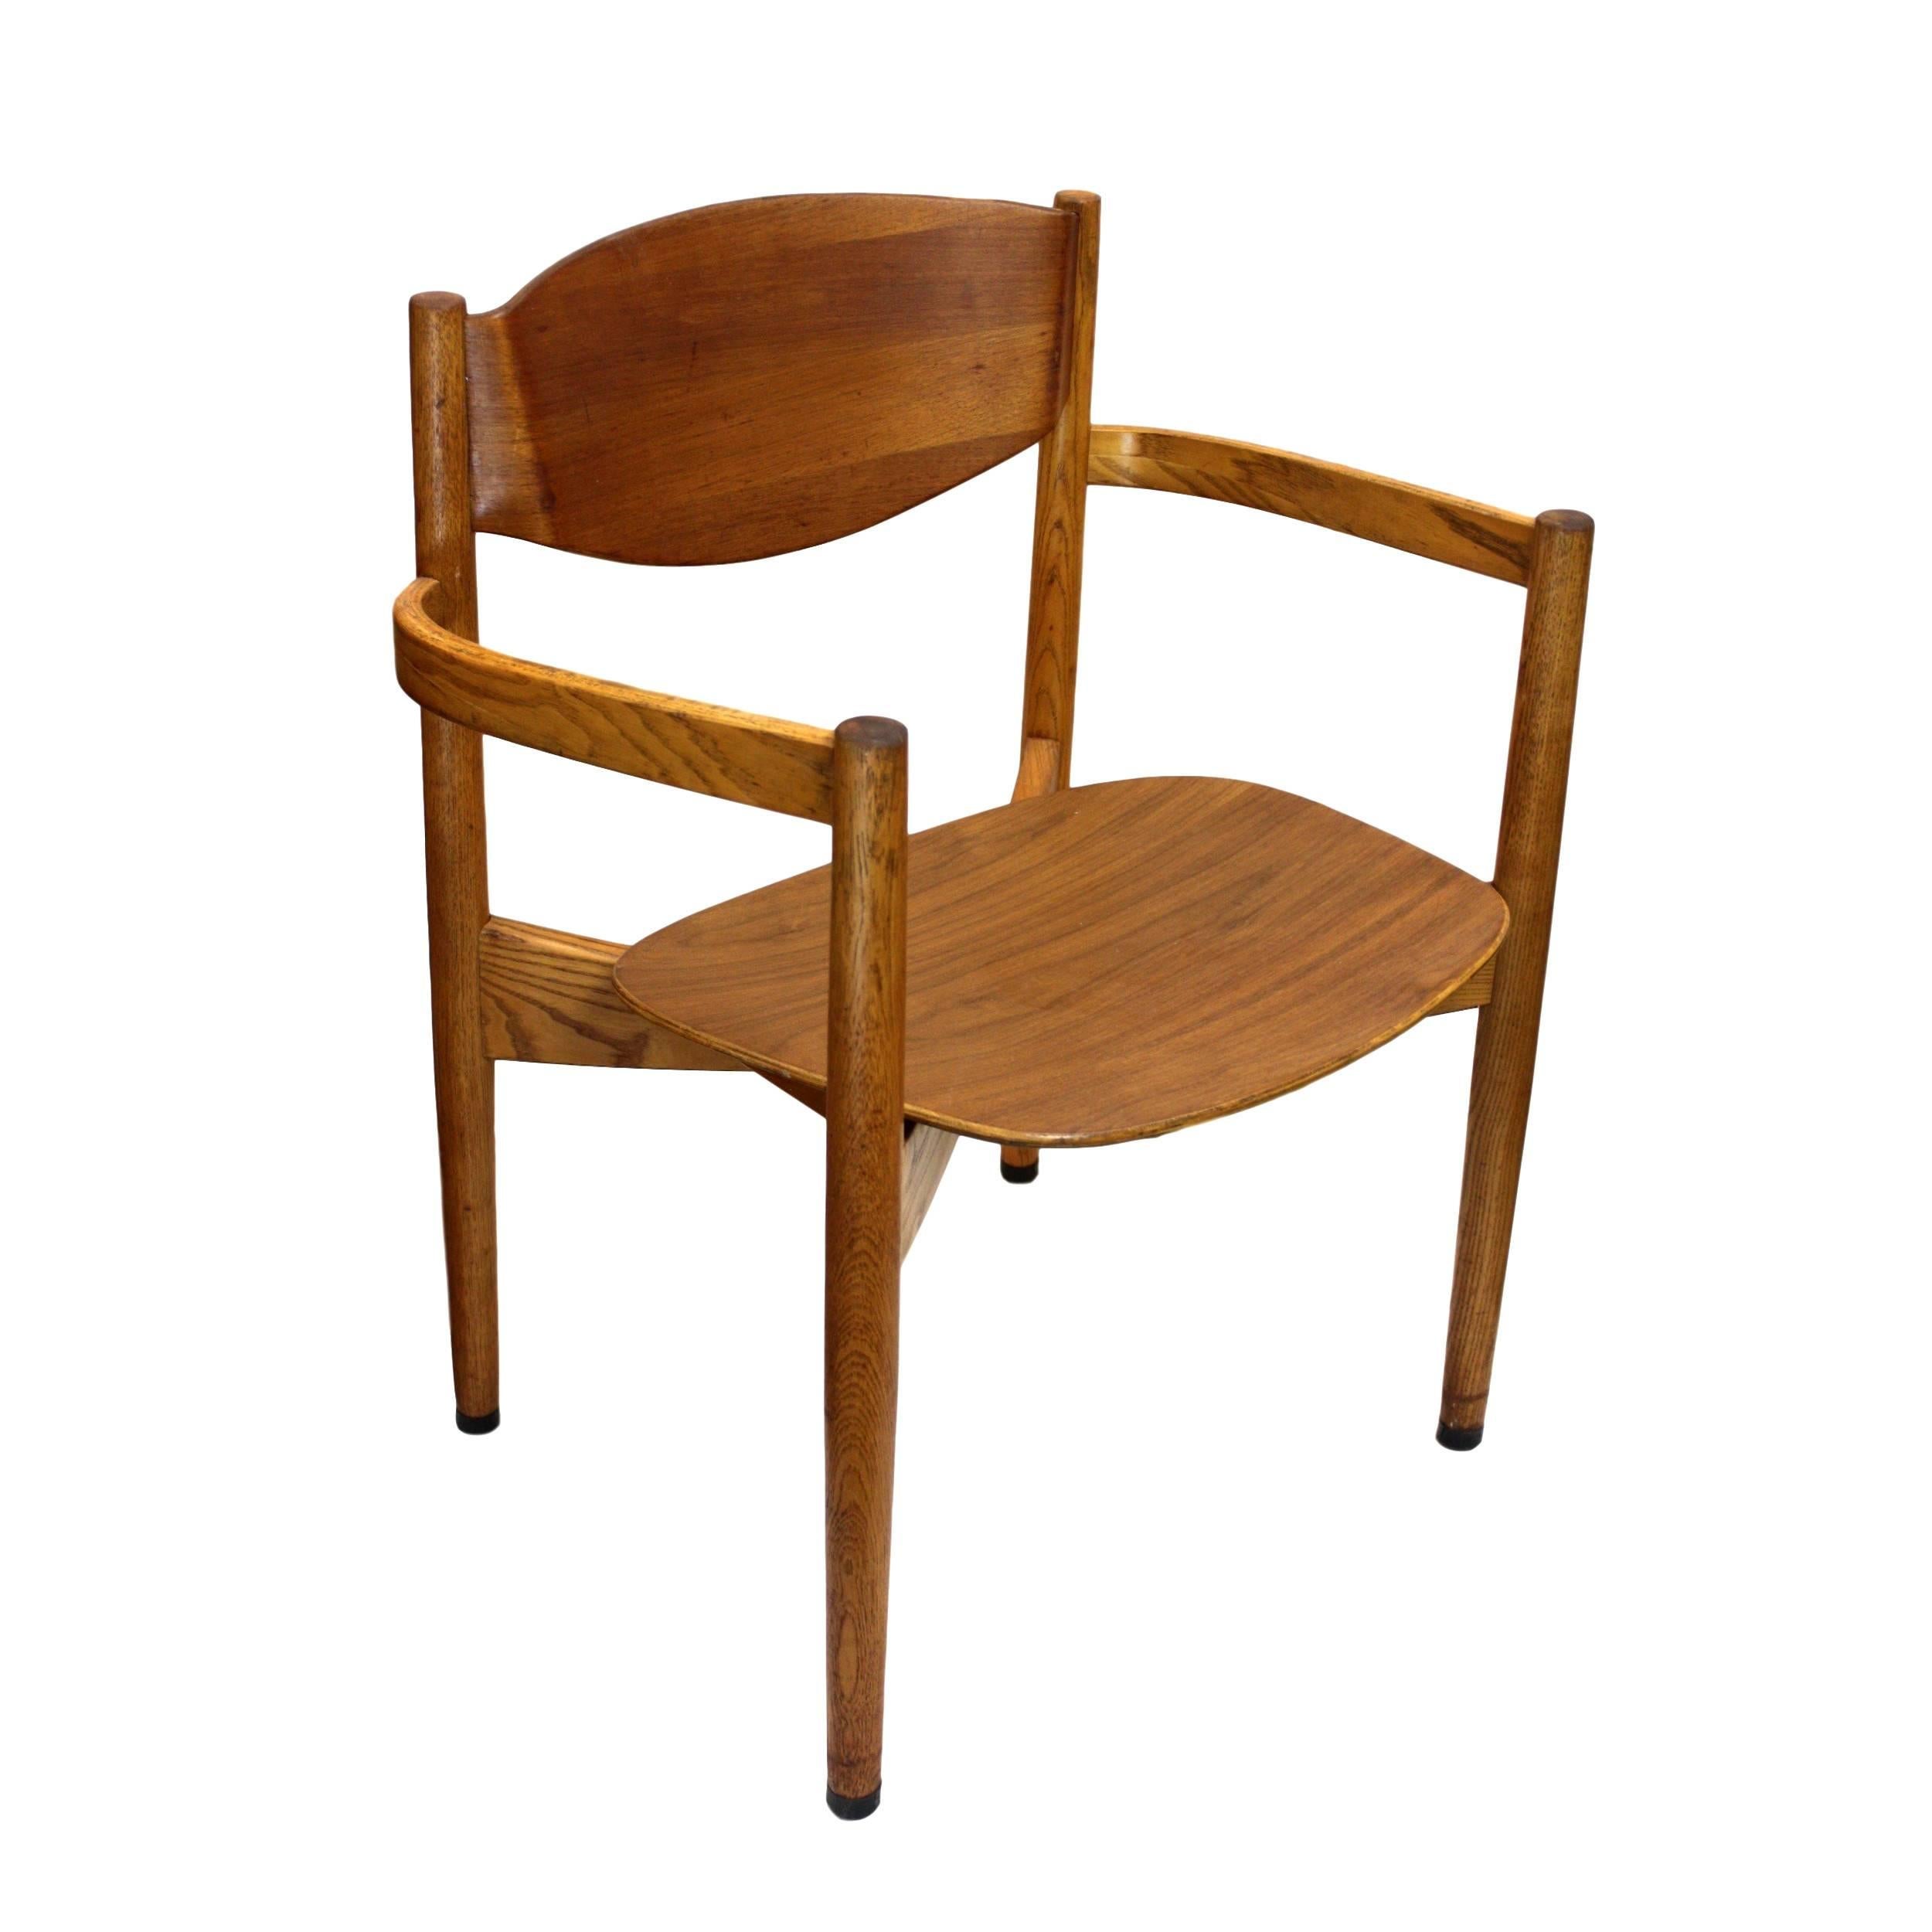 This gorgeous set of chairs features solid ash construction with walnut-veneered bent-plywood seat and back. Don't let the delicate design fool you, these chairs are sturdy! The magnificent, curvaceous Jens Risom lines are made possible by a high